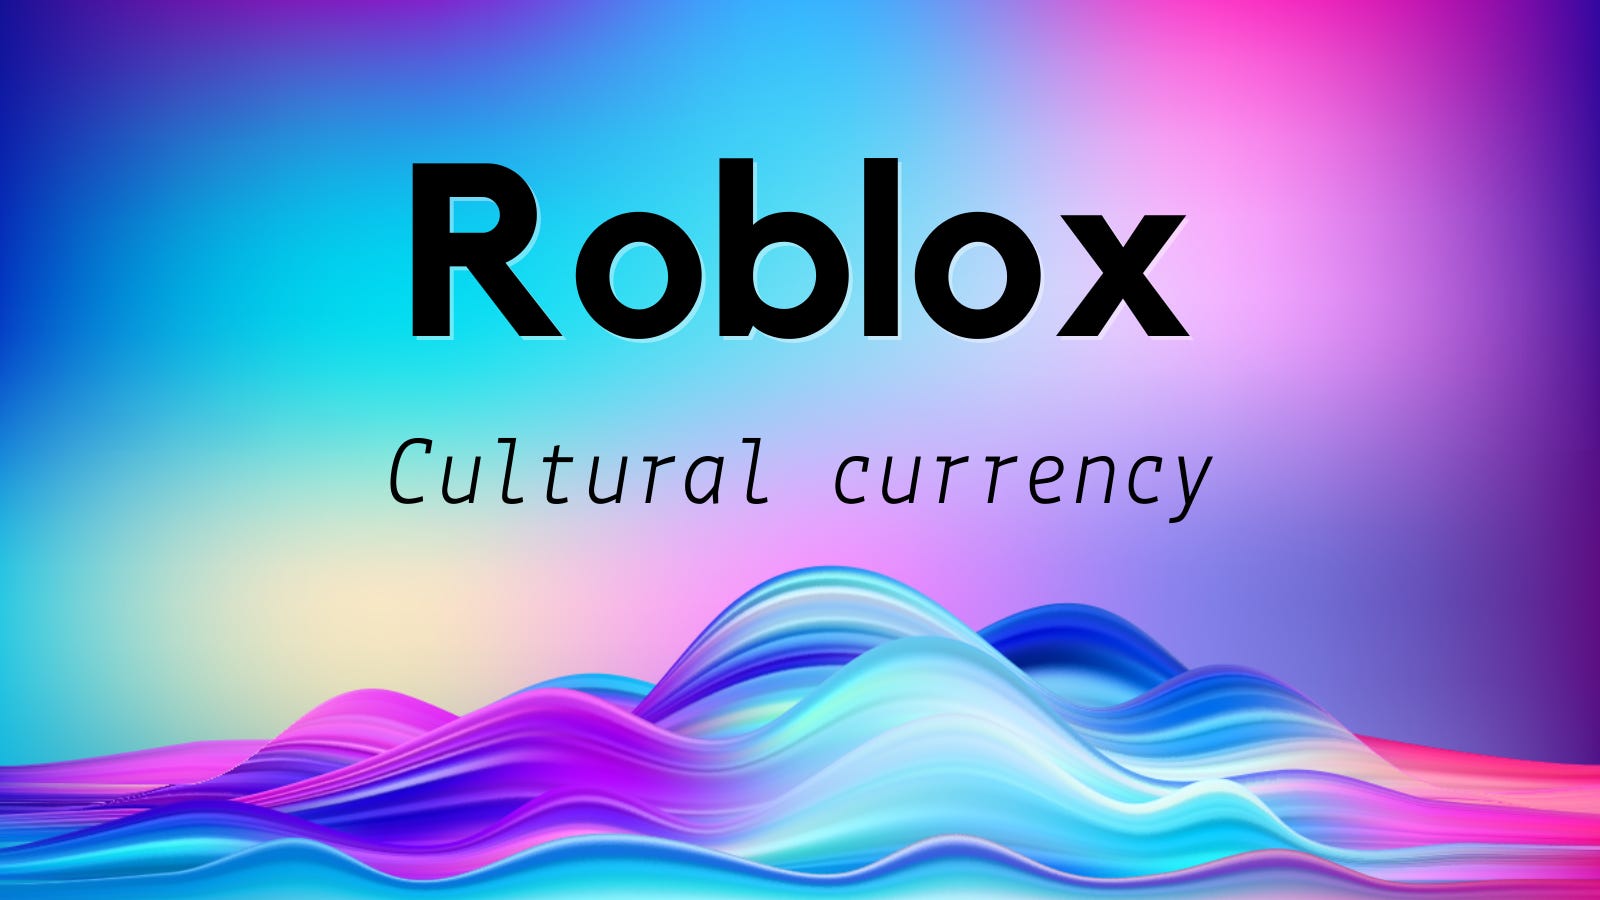 Roblox: Cultural Currency - by Mario Gabriele